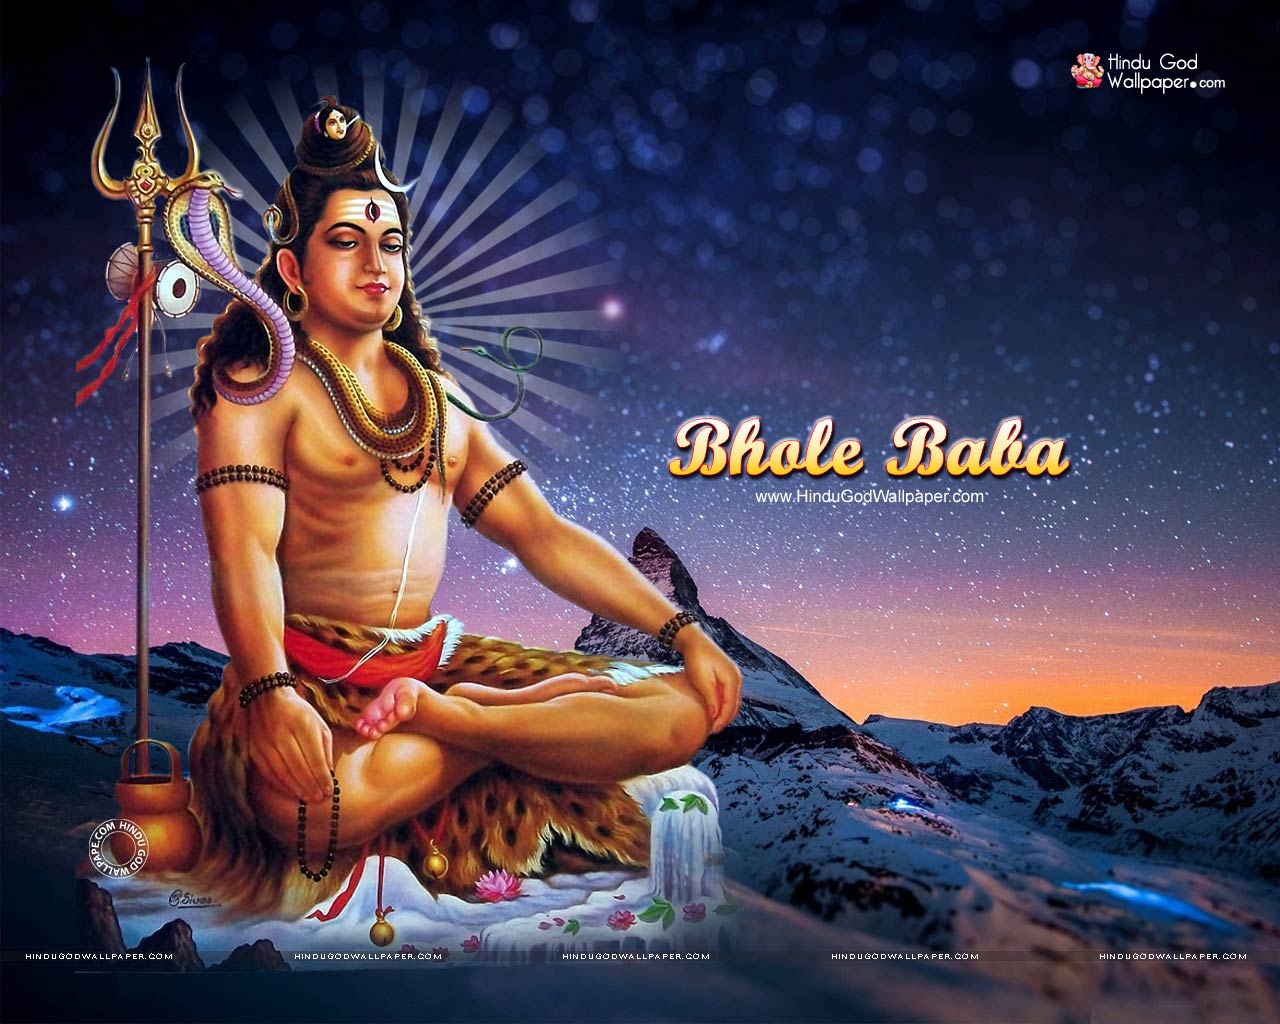 Bhole Baba Wallpaper Hd - Nice Pictures Of The Stars - HD Wallpaper 